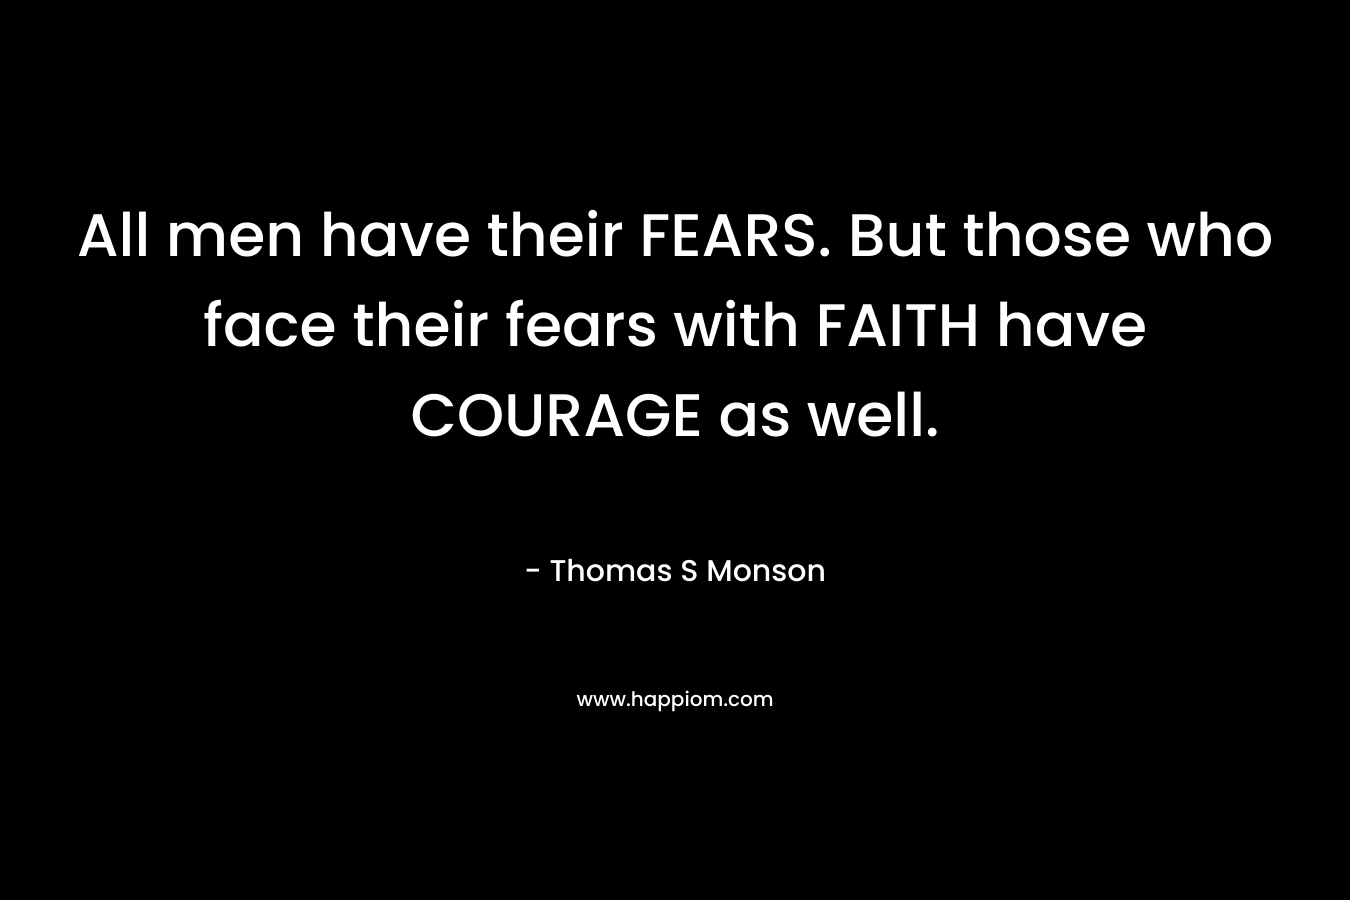 All men have their FEARS. But those who face their fears with FAITH have COURAGE as well.